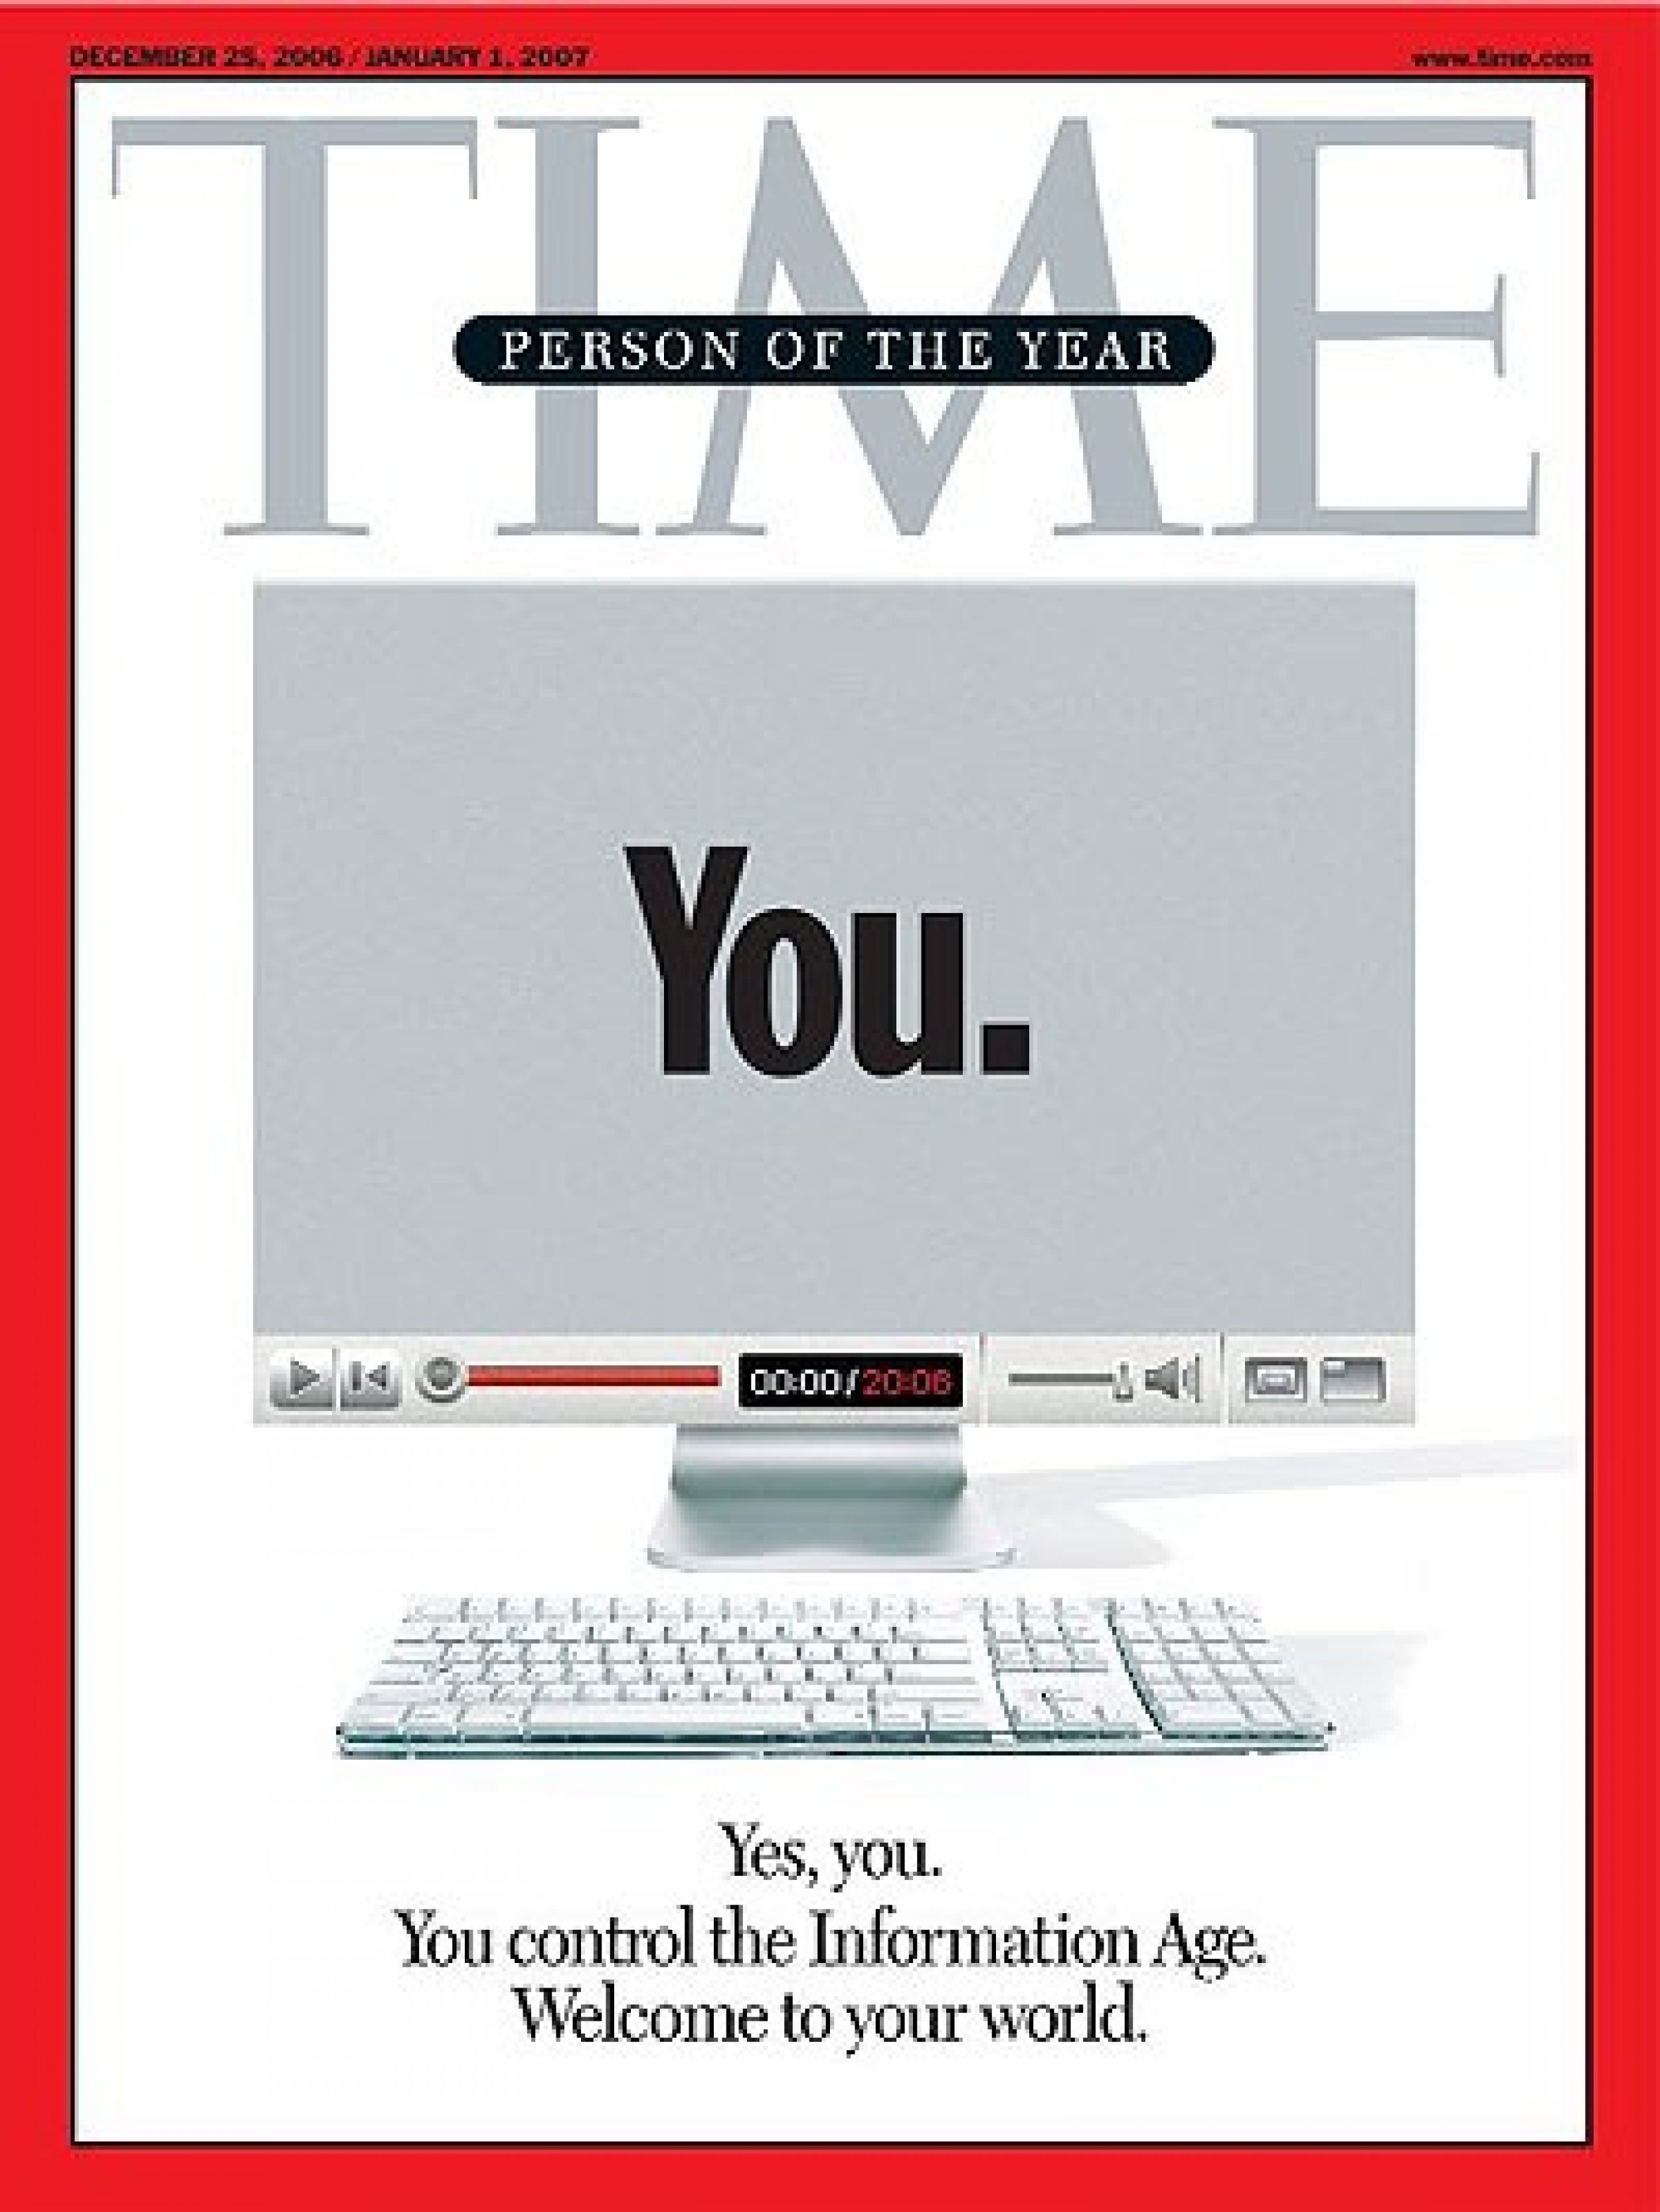 Person of the Year 2006